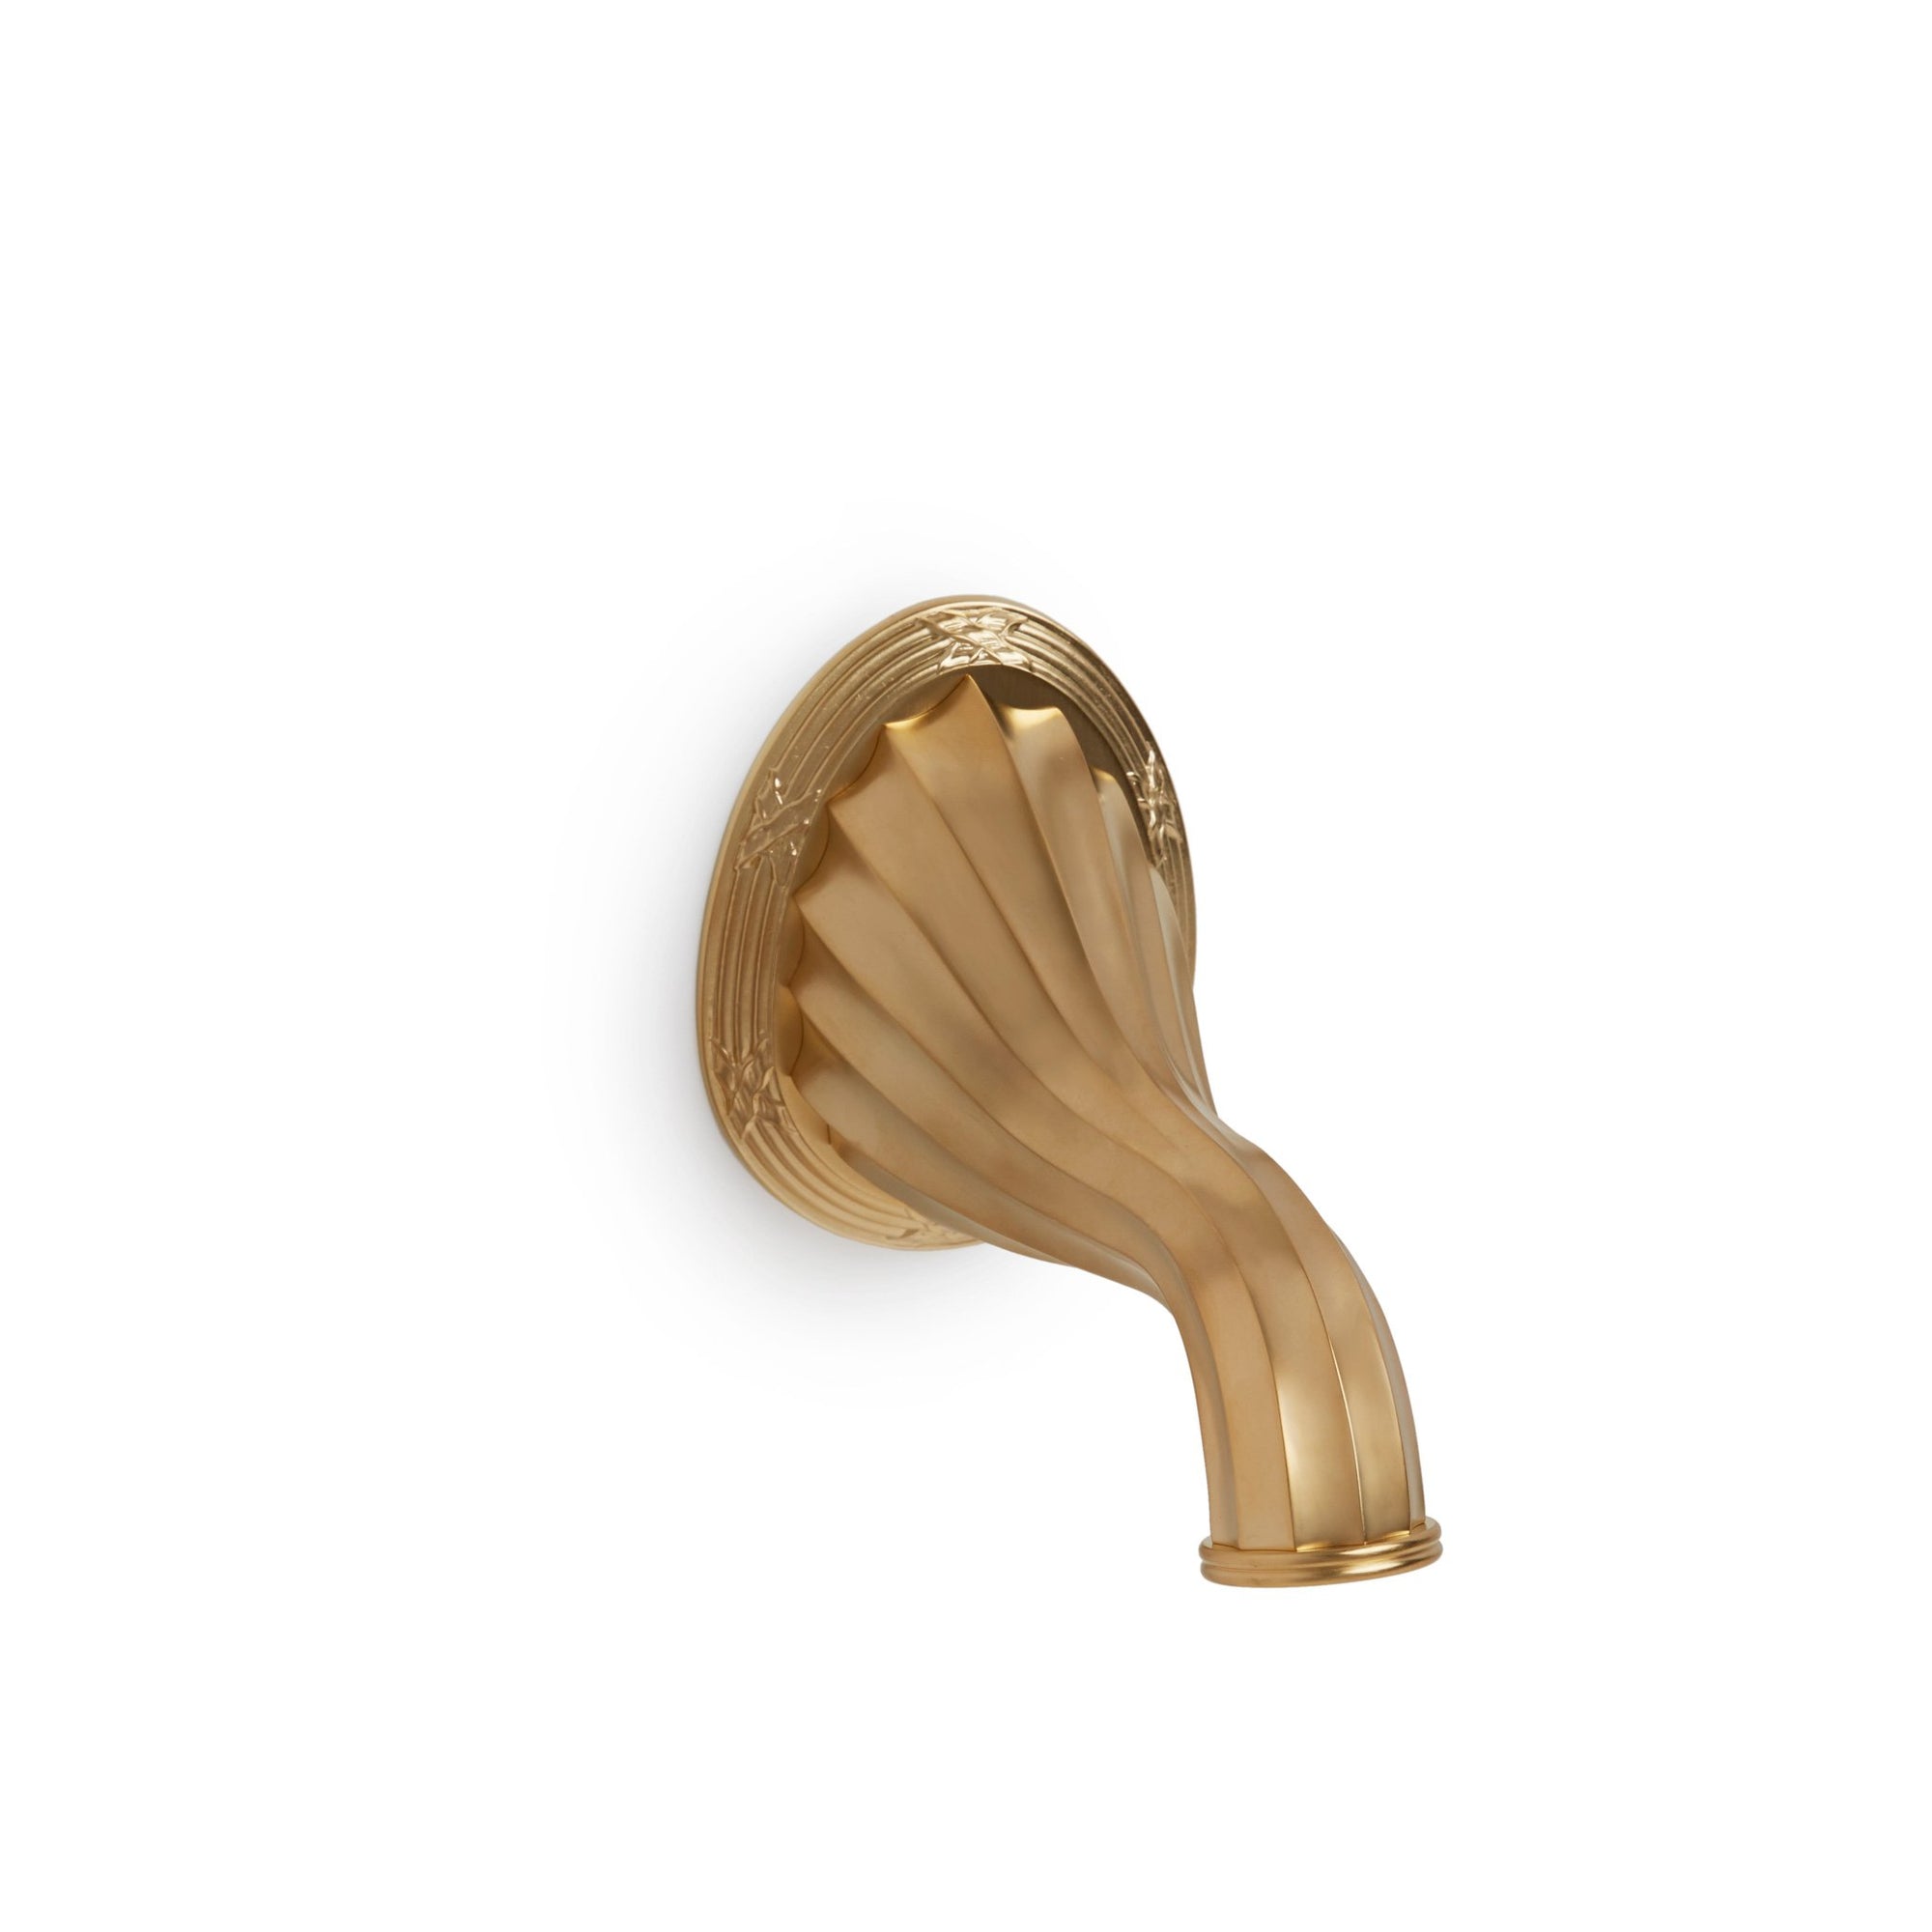 0818TUB-GP Sherle Wagner International Ribbon & Reed Wall Mount Tub Spout in Gold Plate metal finish